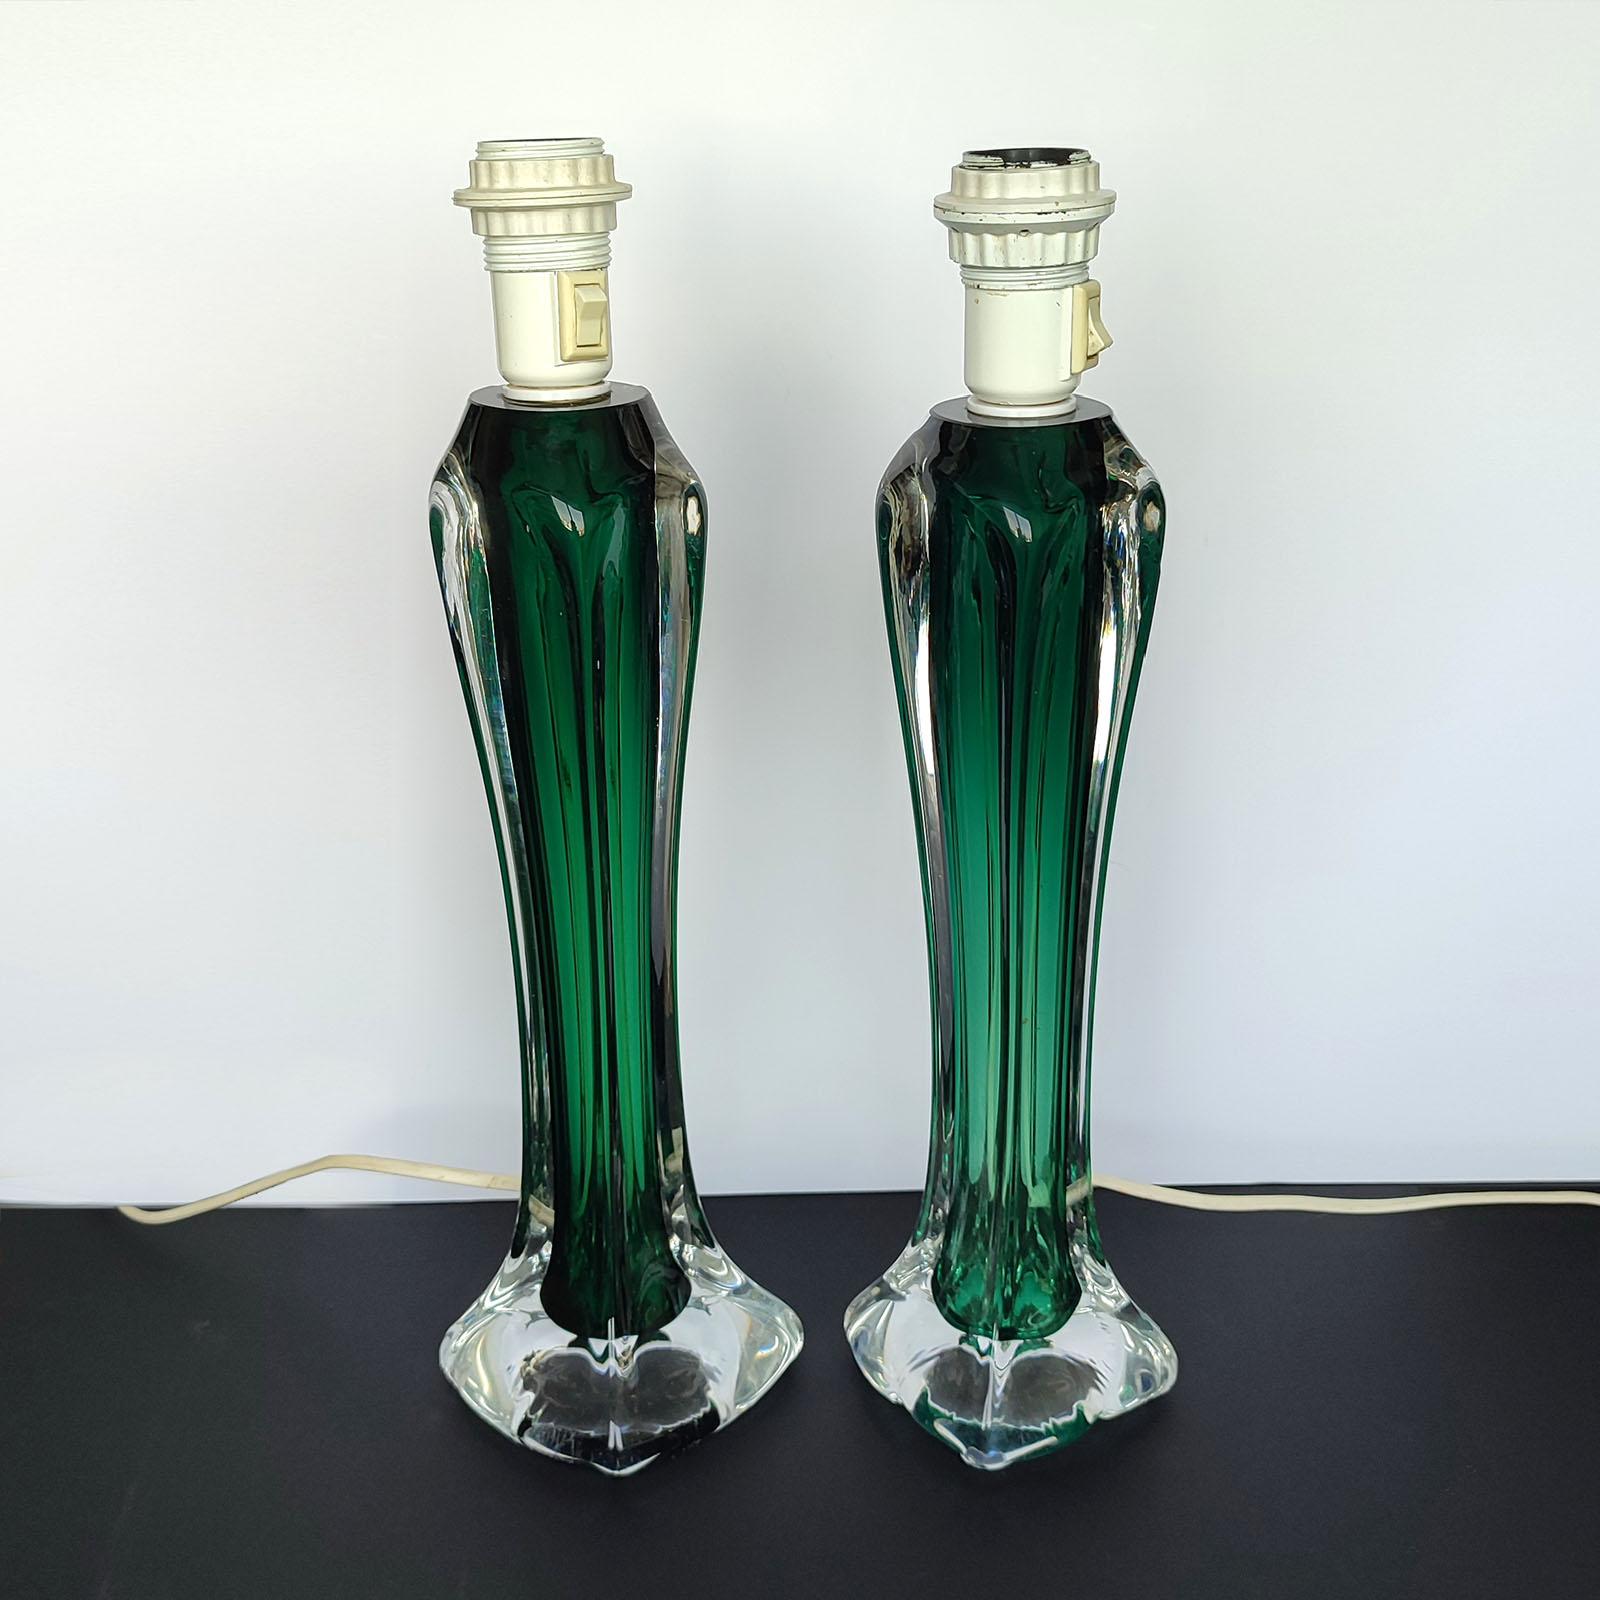 Swedish Mid-Century Modern Paul Kedelv Flygsfors Green Glass Table Lamps, Sweden, 1950s For Sale